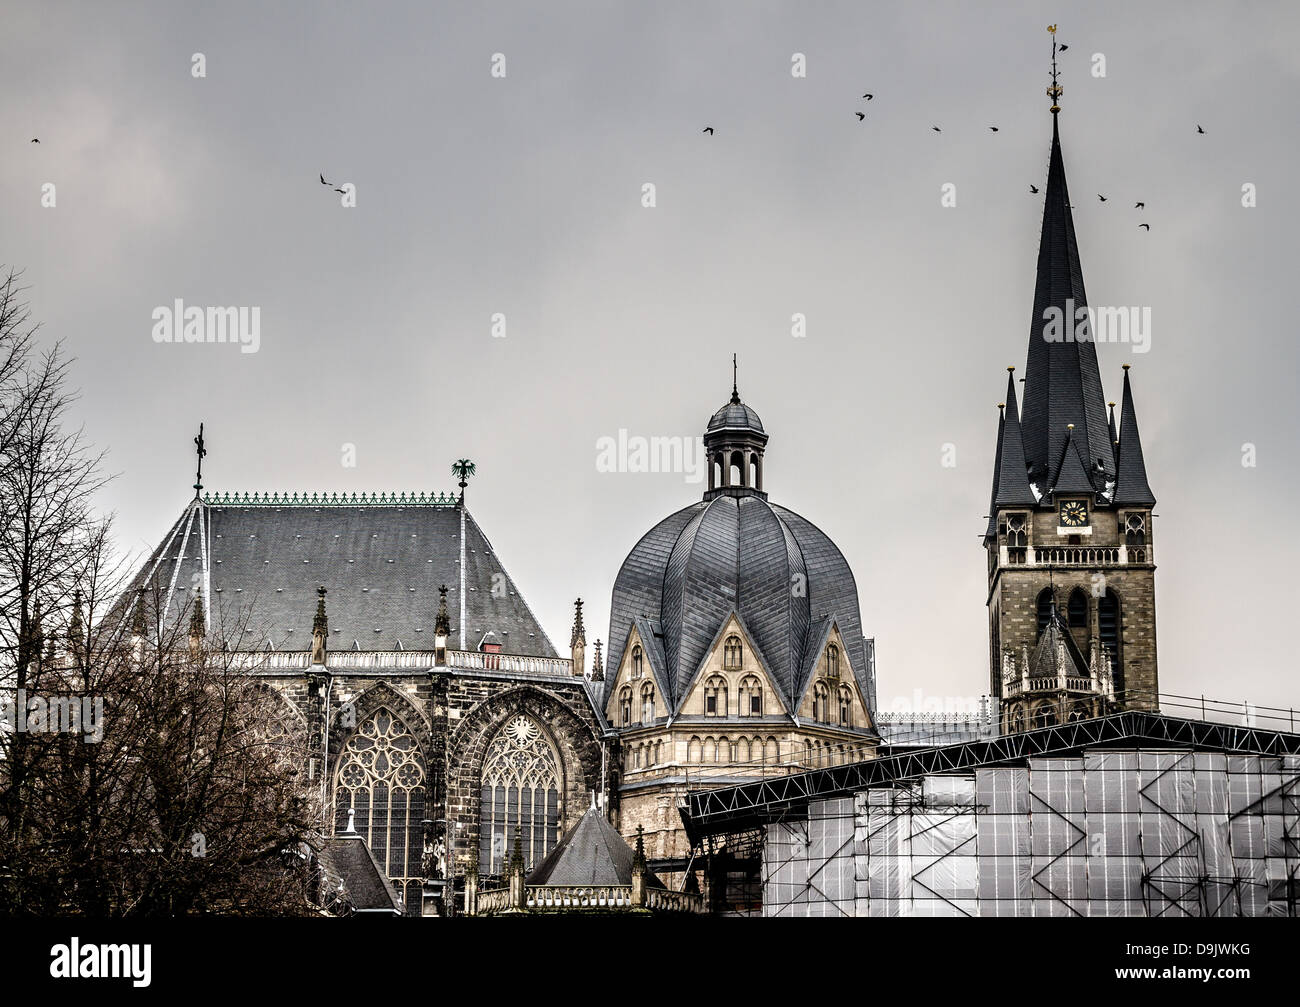 Tower, dome and nave of Aachen's Imperial Cathedral in Germany Stock Photo  - Alamy